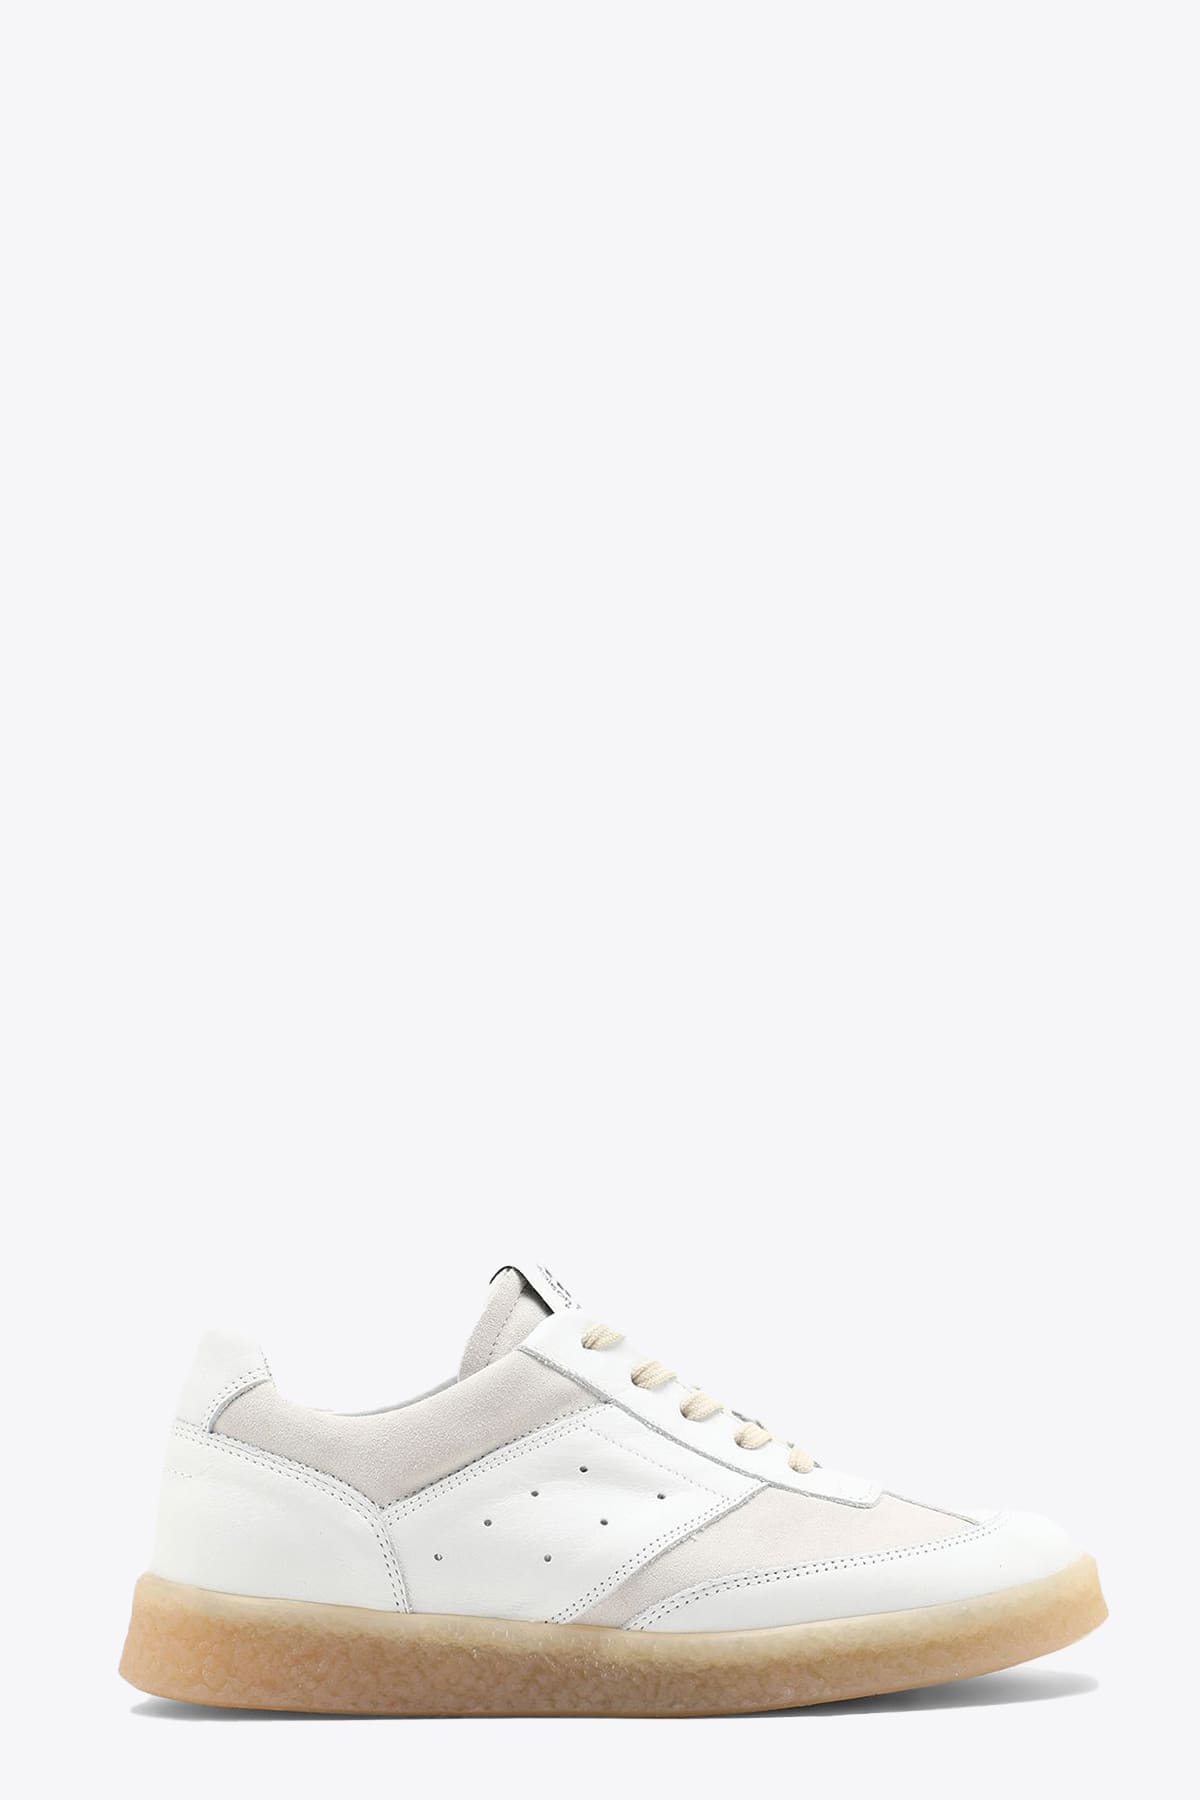 MM6 Maison Margiela Lace-up Sneaker White leather low top lace-up sneaker - 6 court